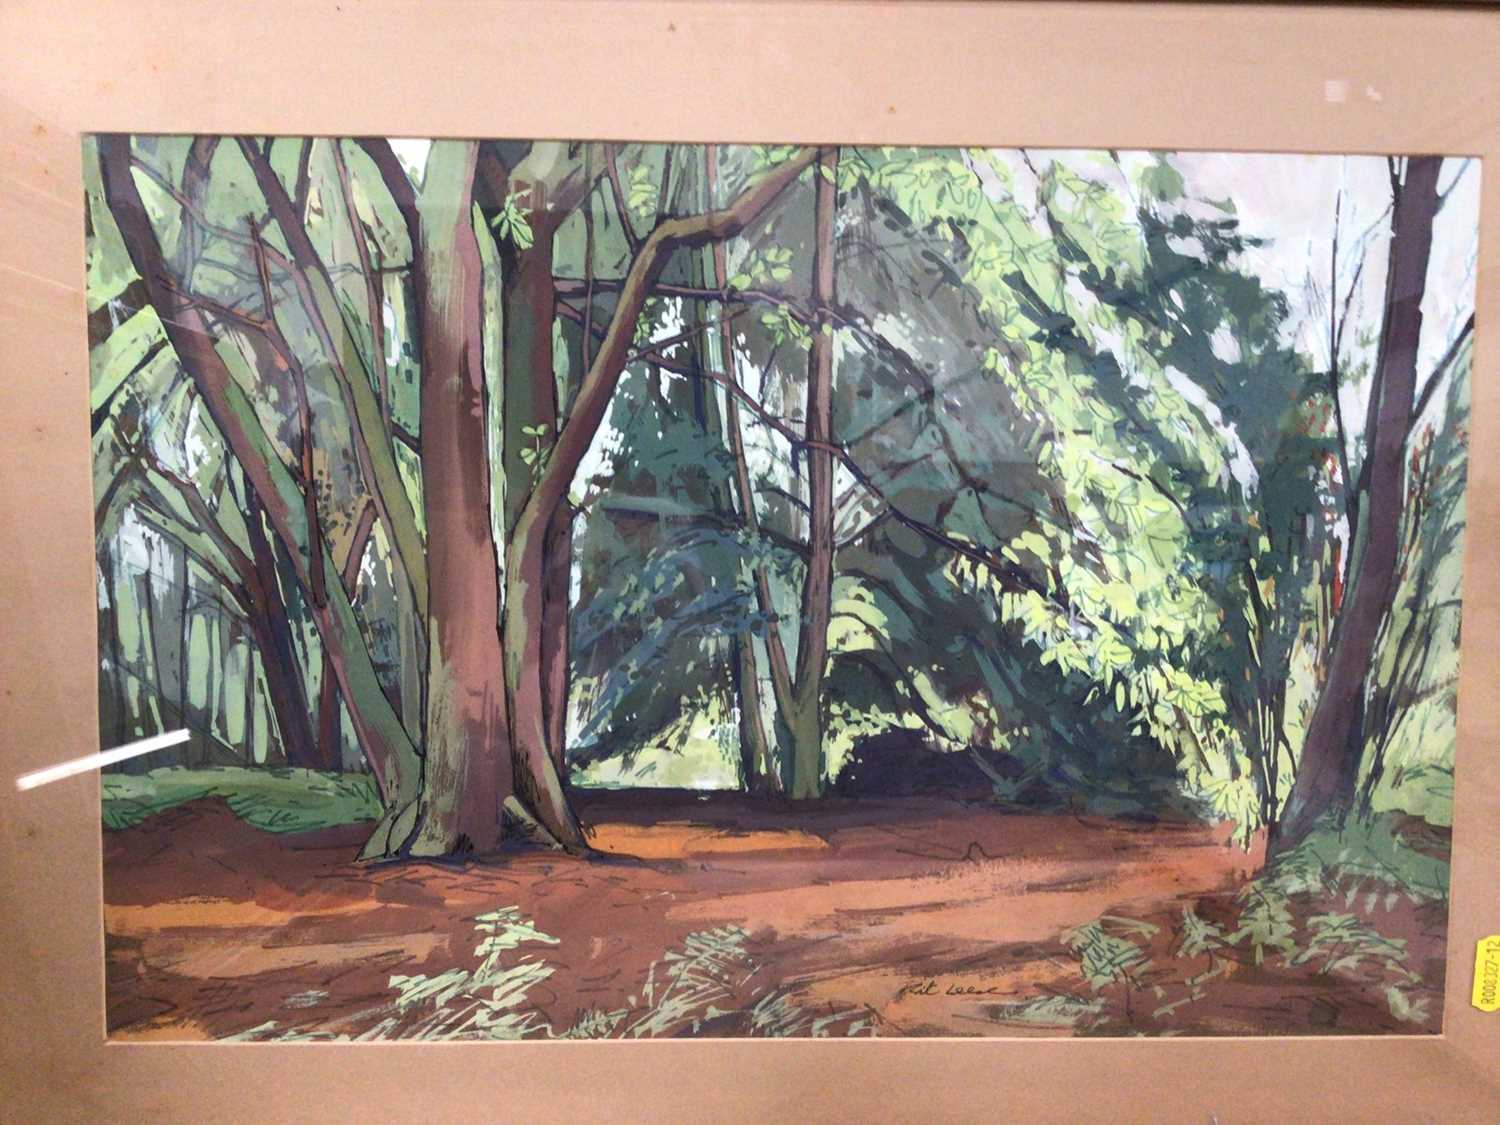 Kit Leese watercolour and ink study - Woodland Glade, Russell Thomas watercolour and ink study - Cot